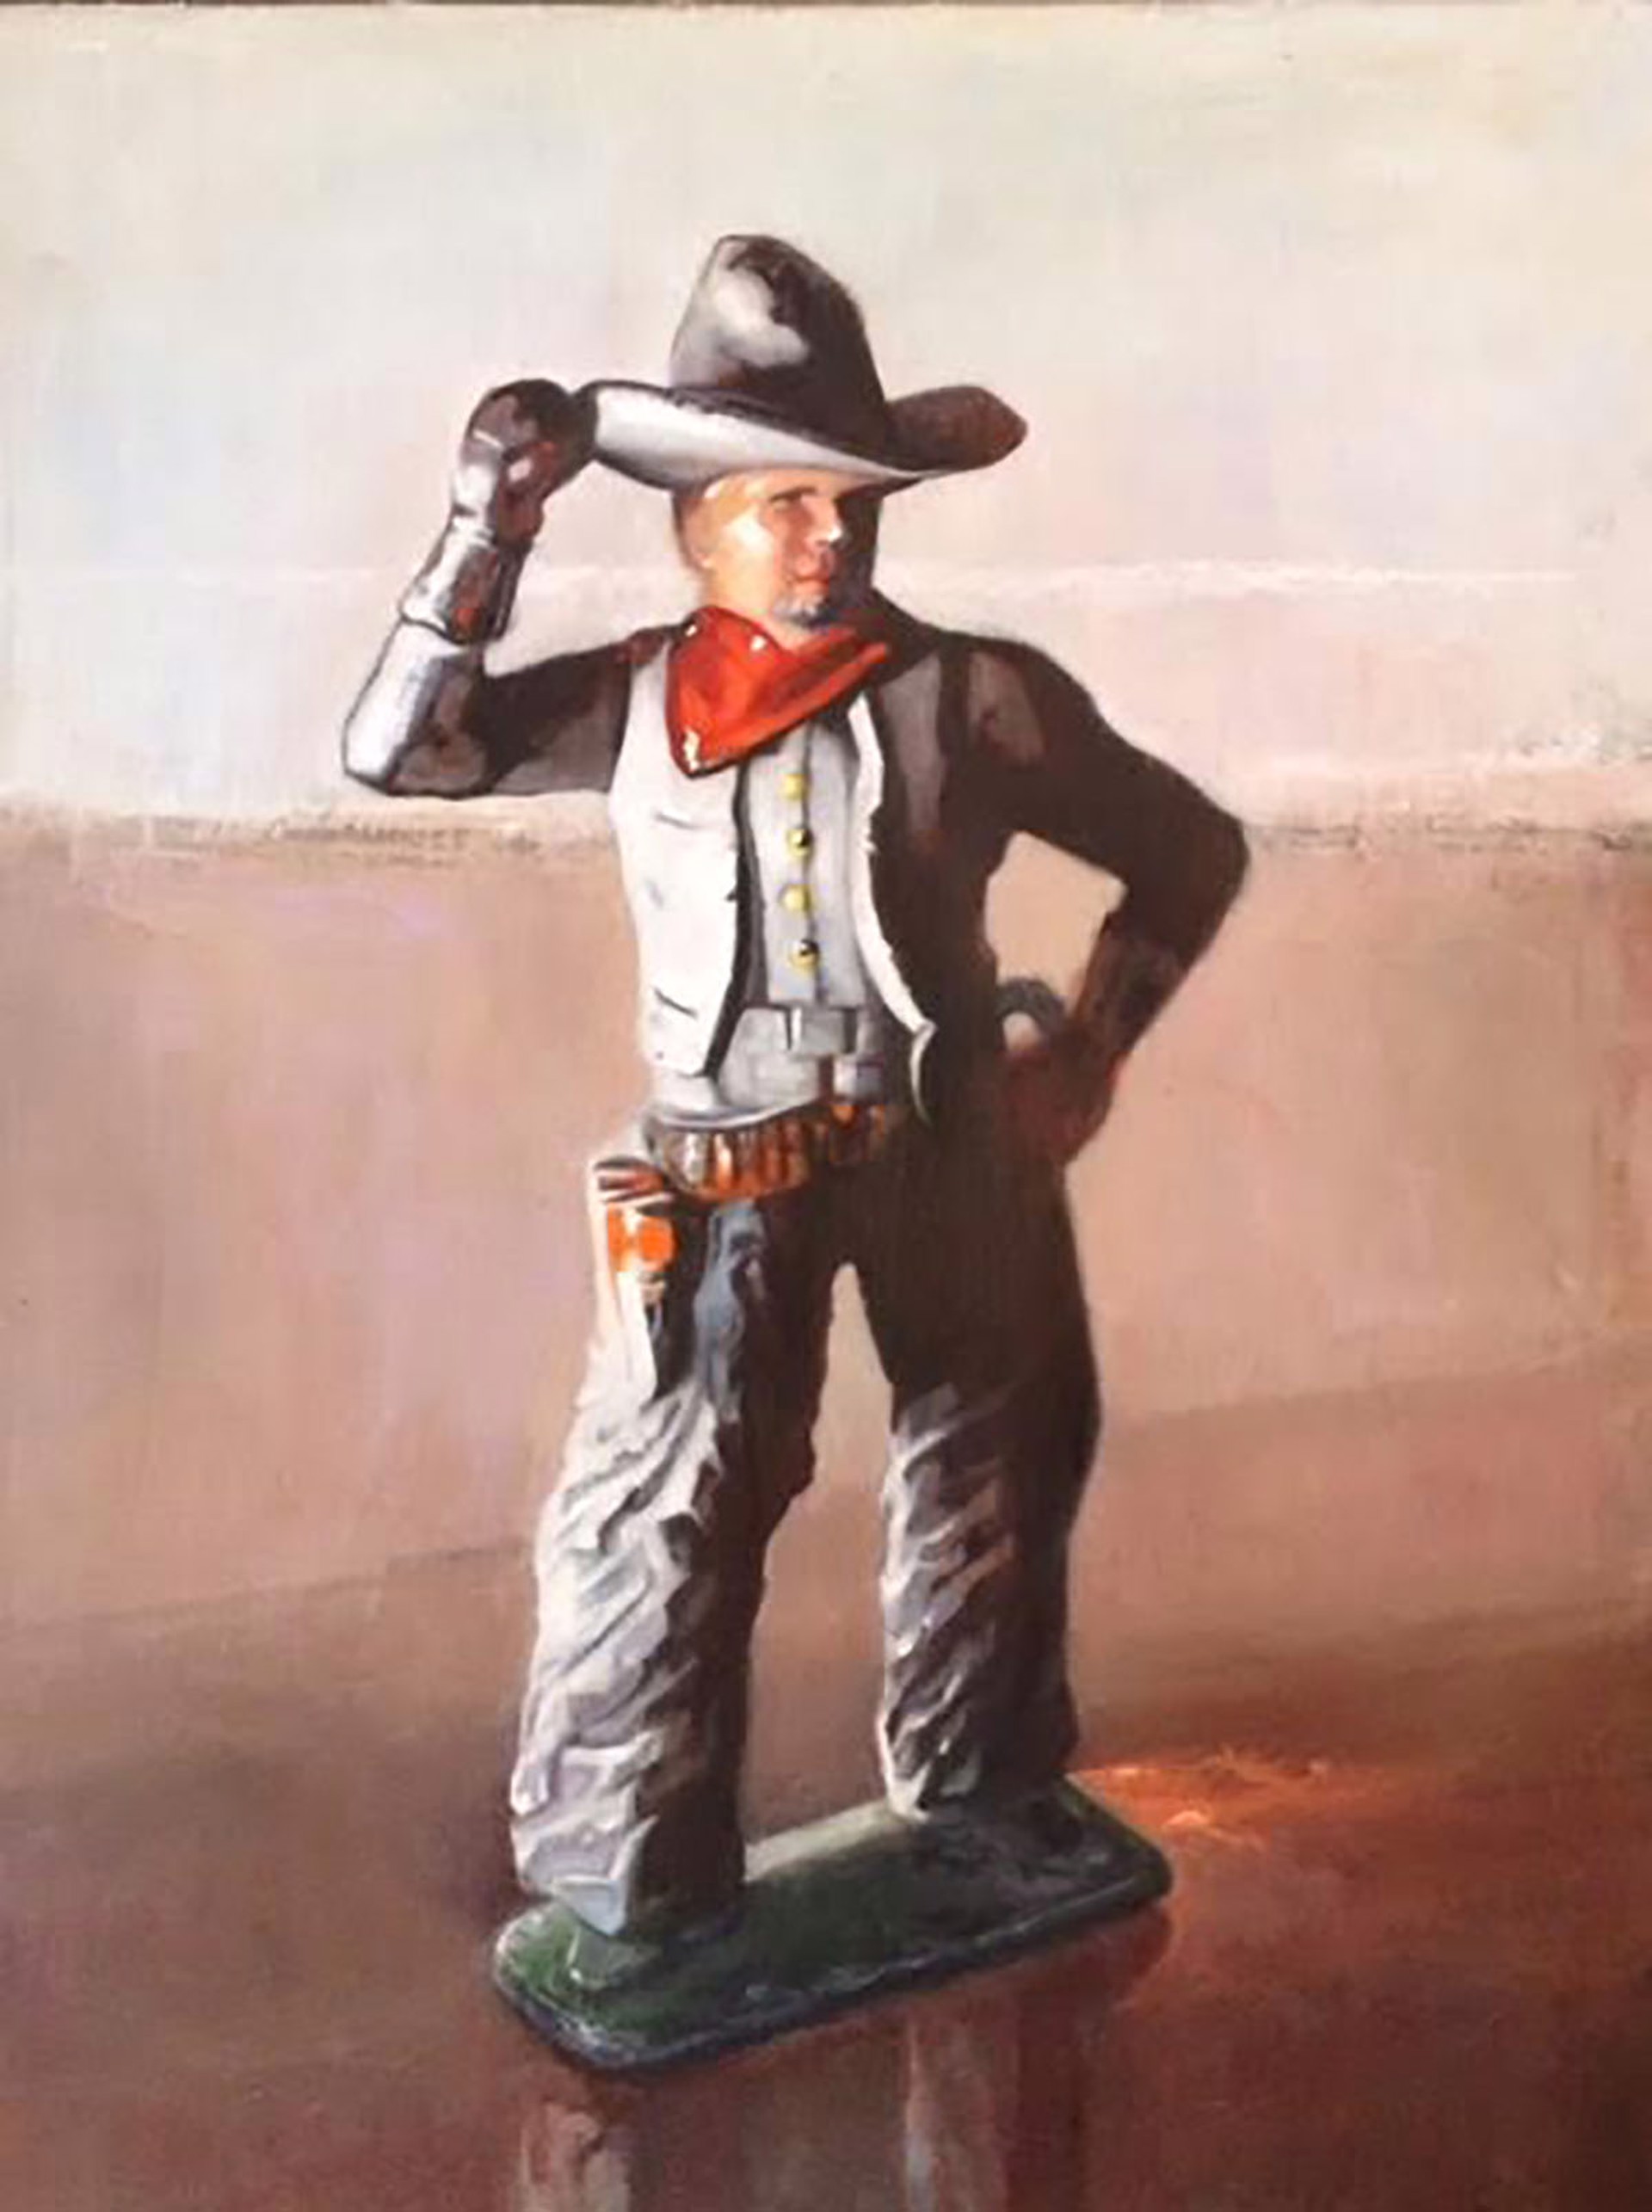 The Jaunty Cowboy by Pat Magers